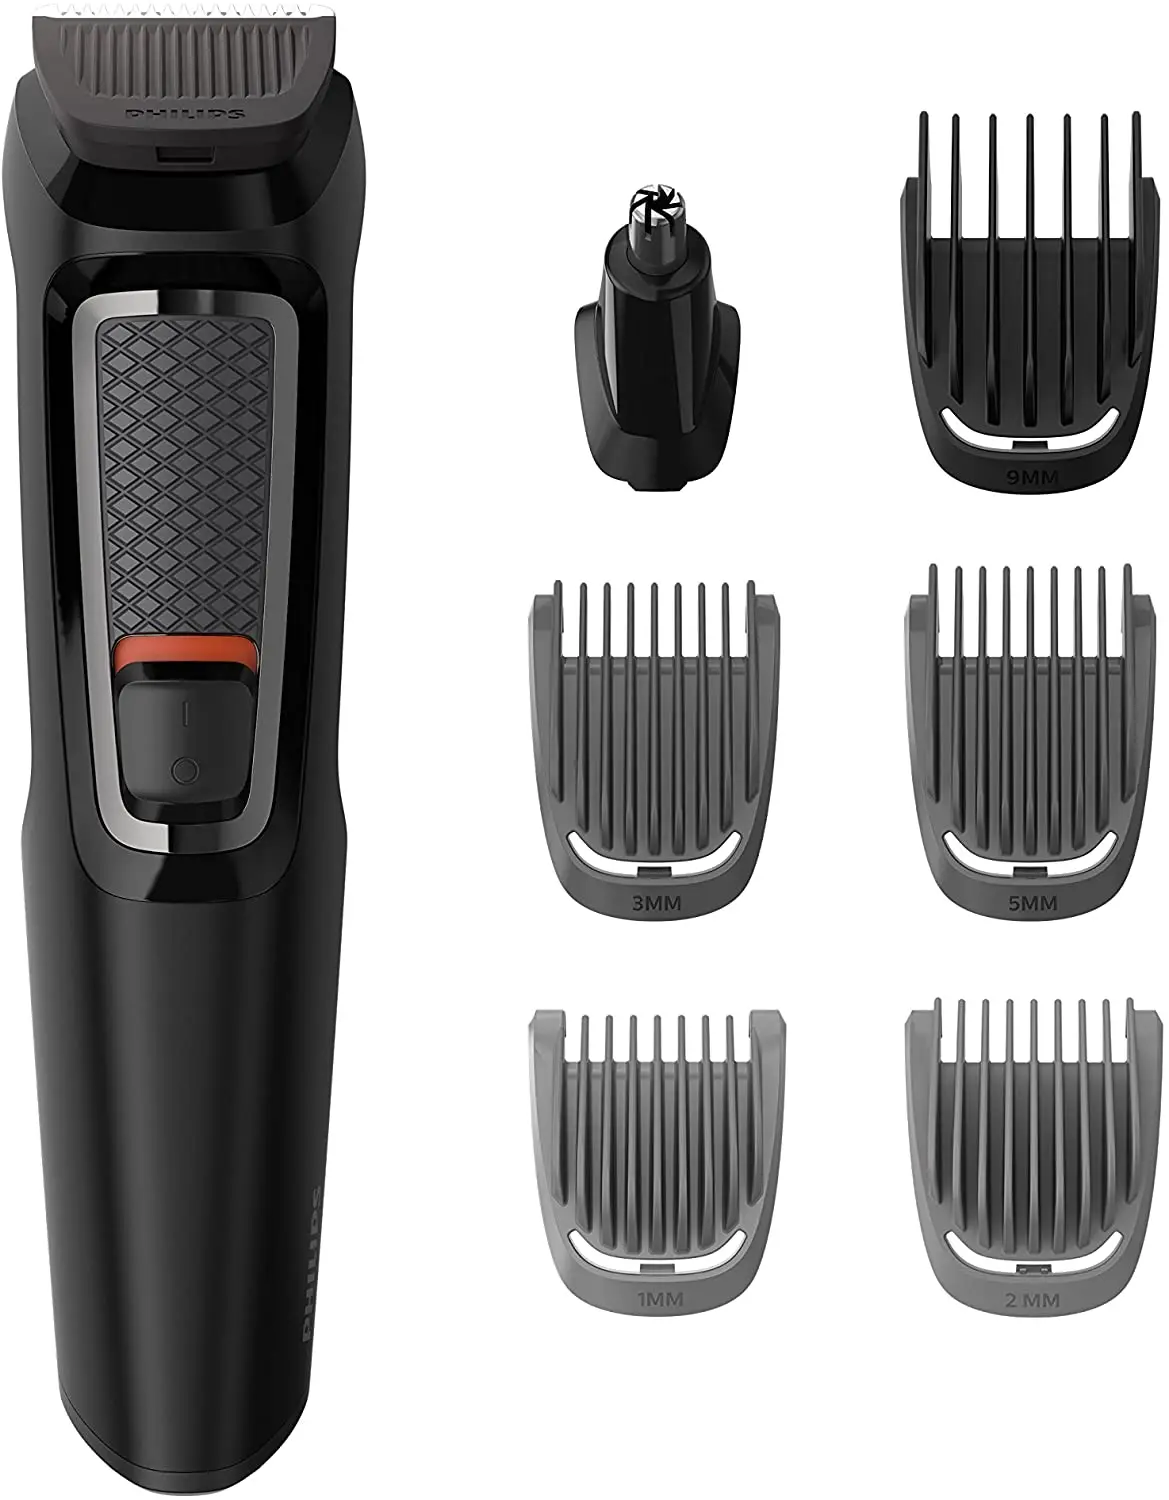 

Philips Series 3000 7-in-1 Multi Grooming Kit for Beard & Hair with Nose Trimmer Attachment - MG3720/13